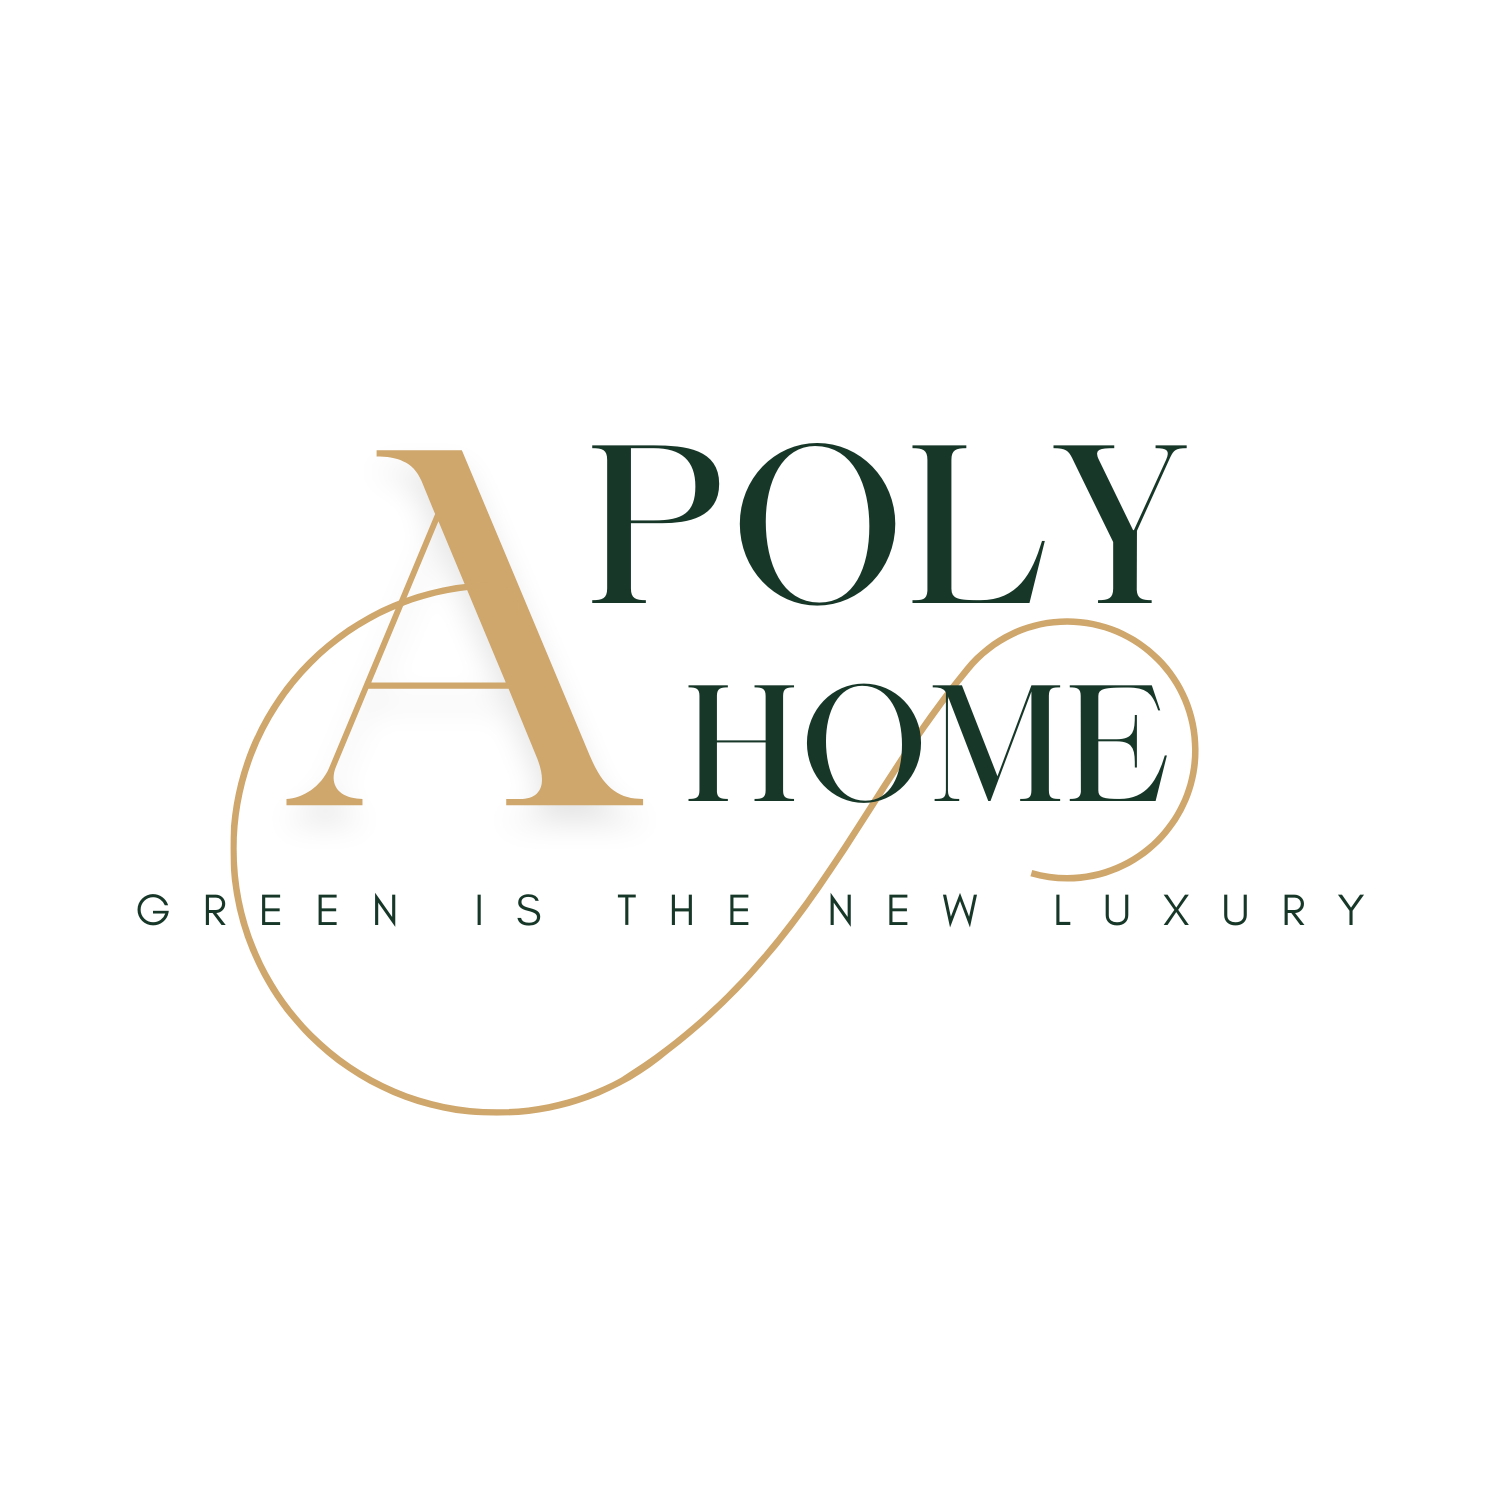 Apoly Home